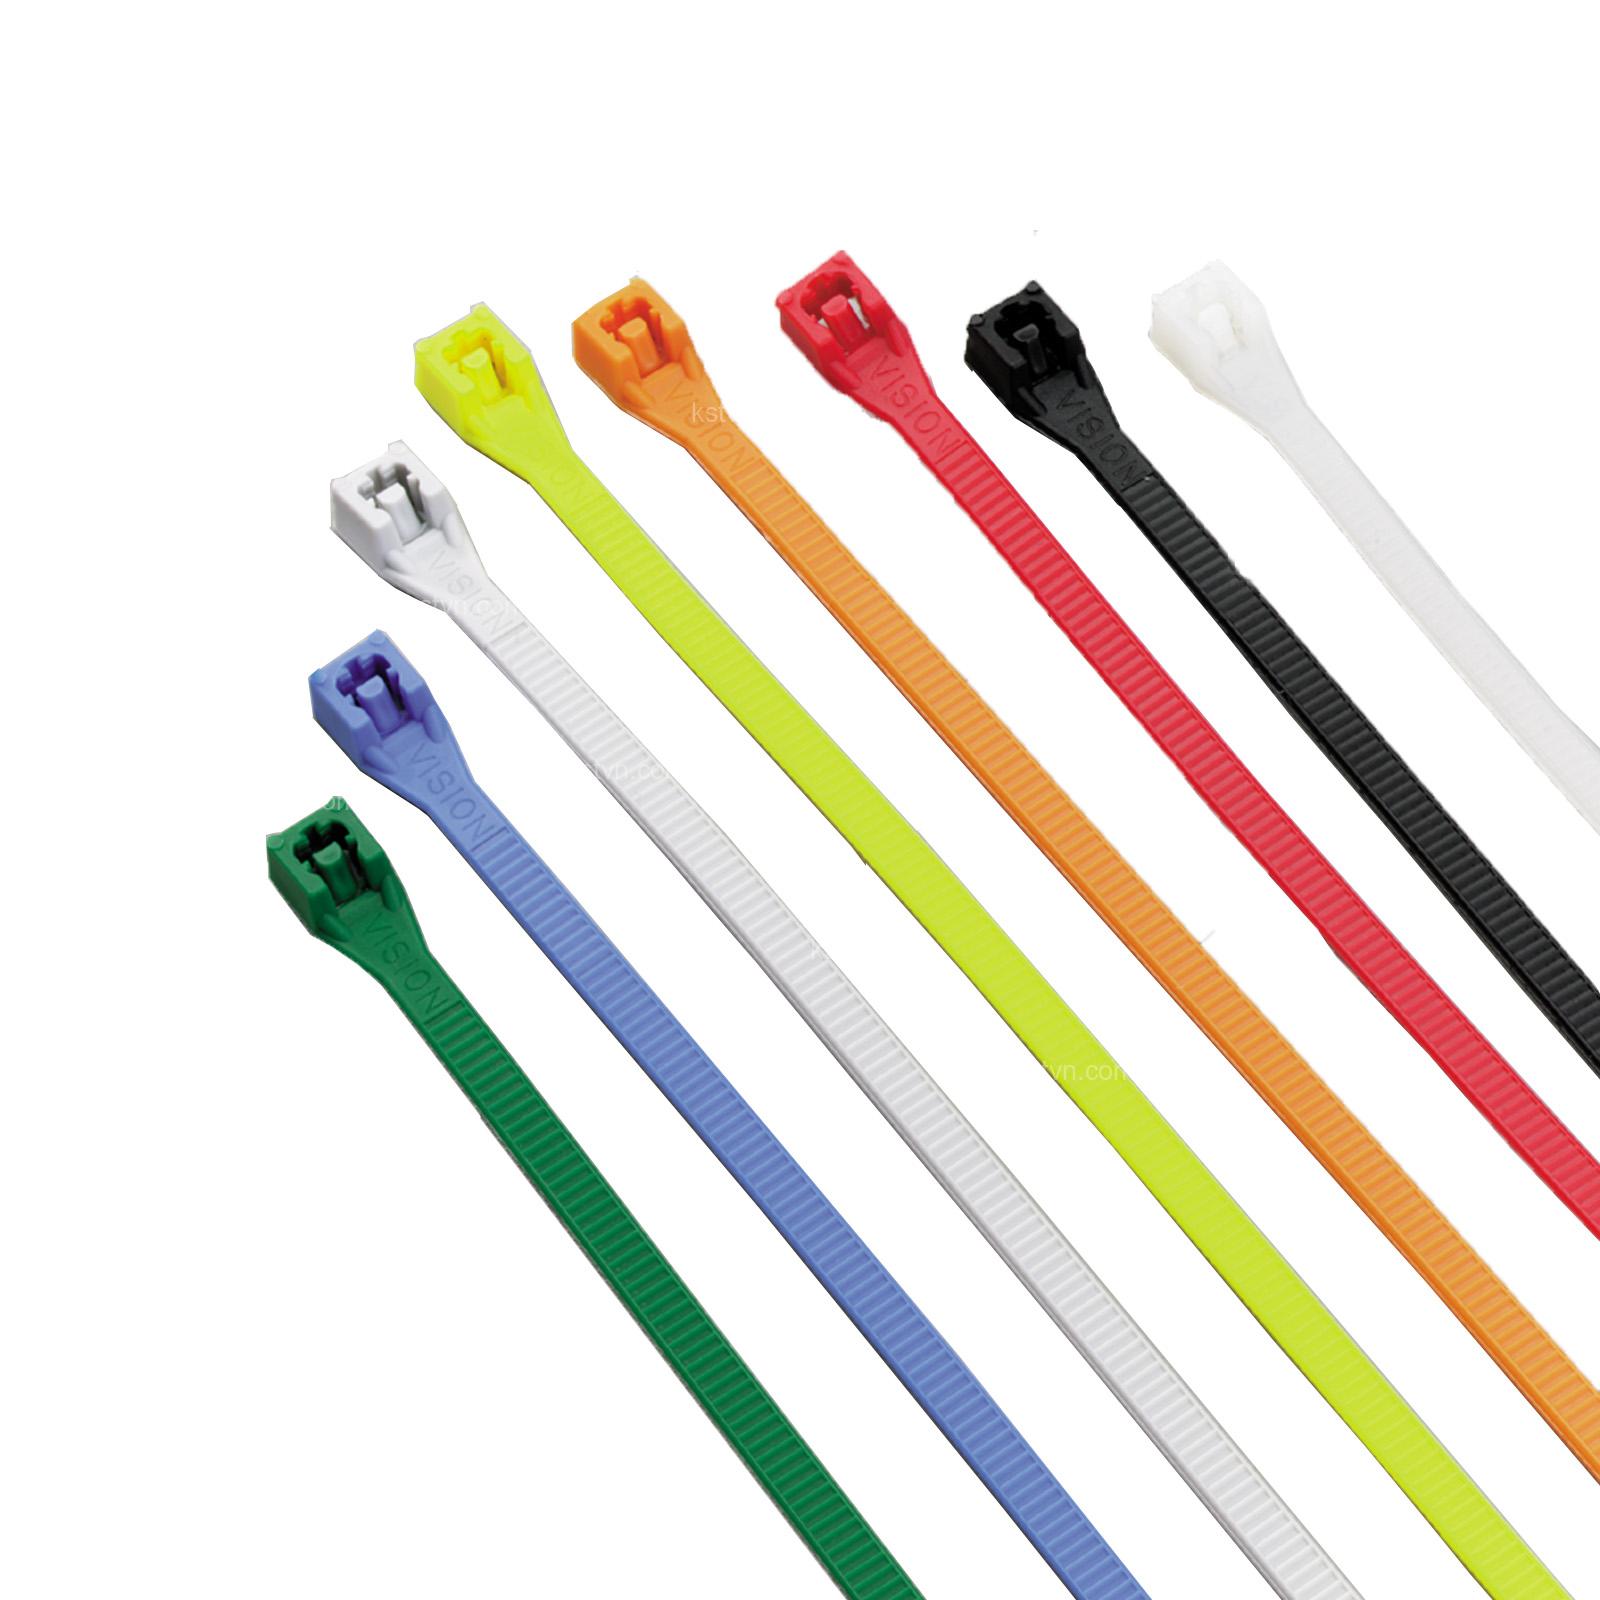 How to choose the right nylon cable tie uv for your project